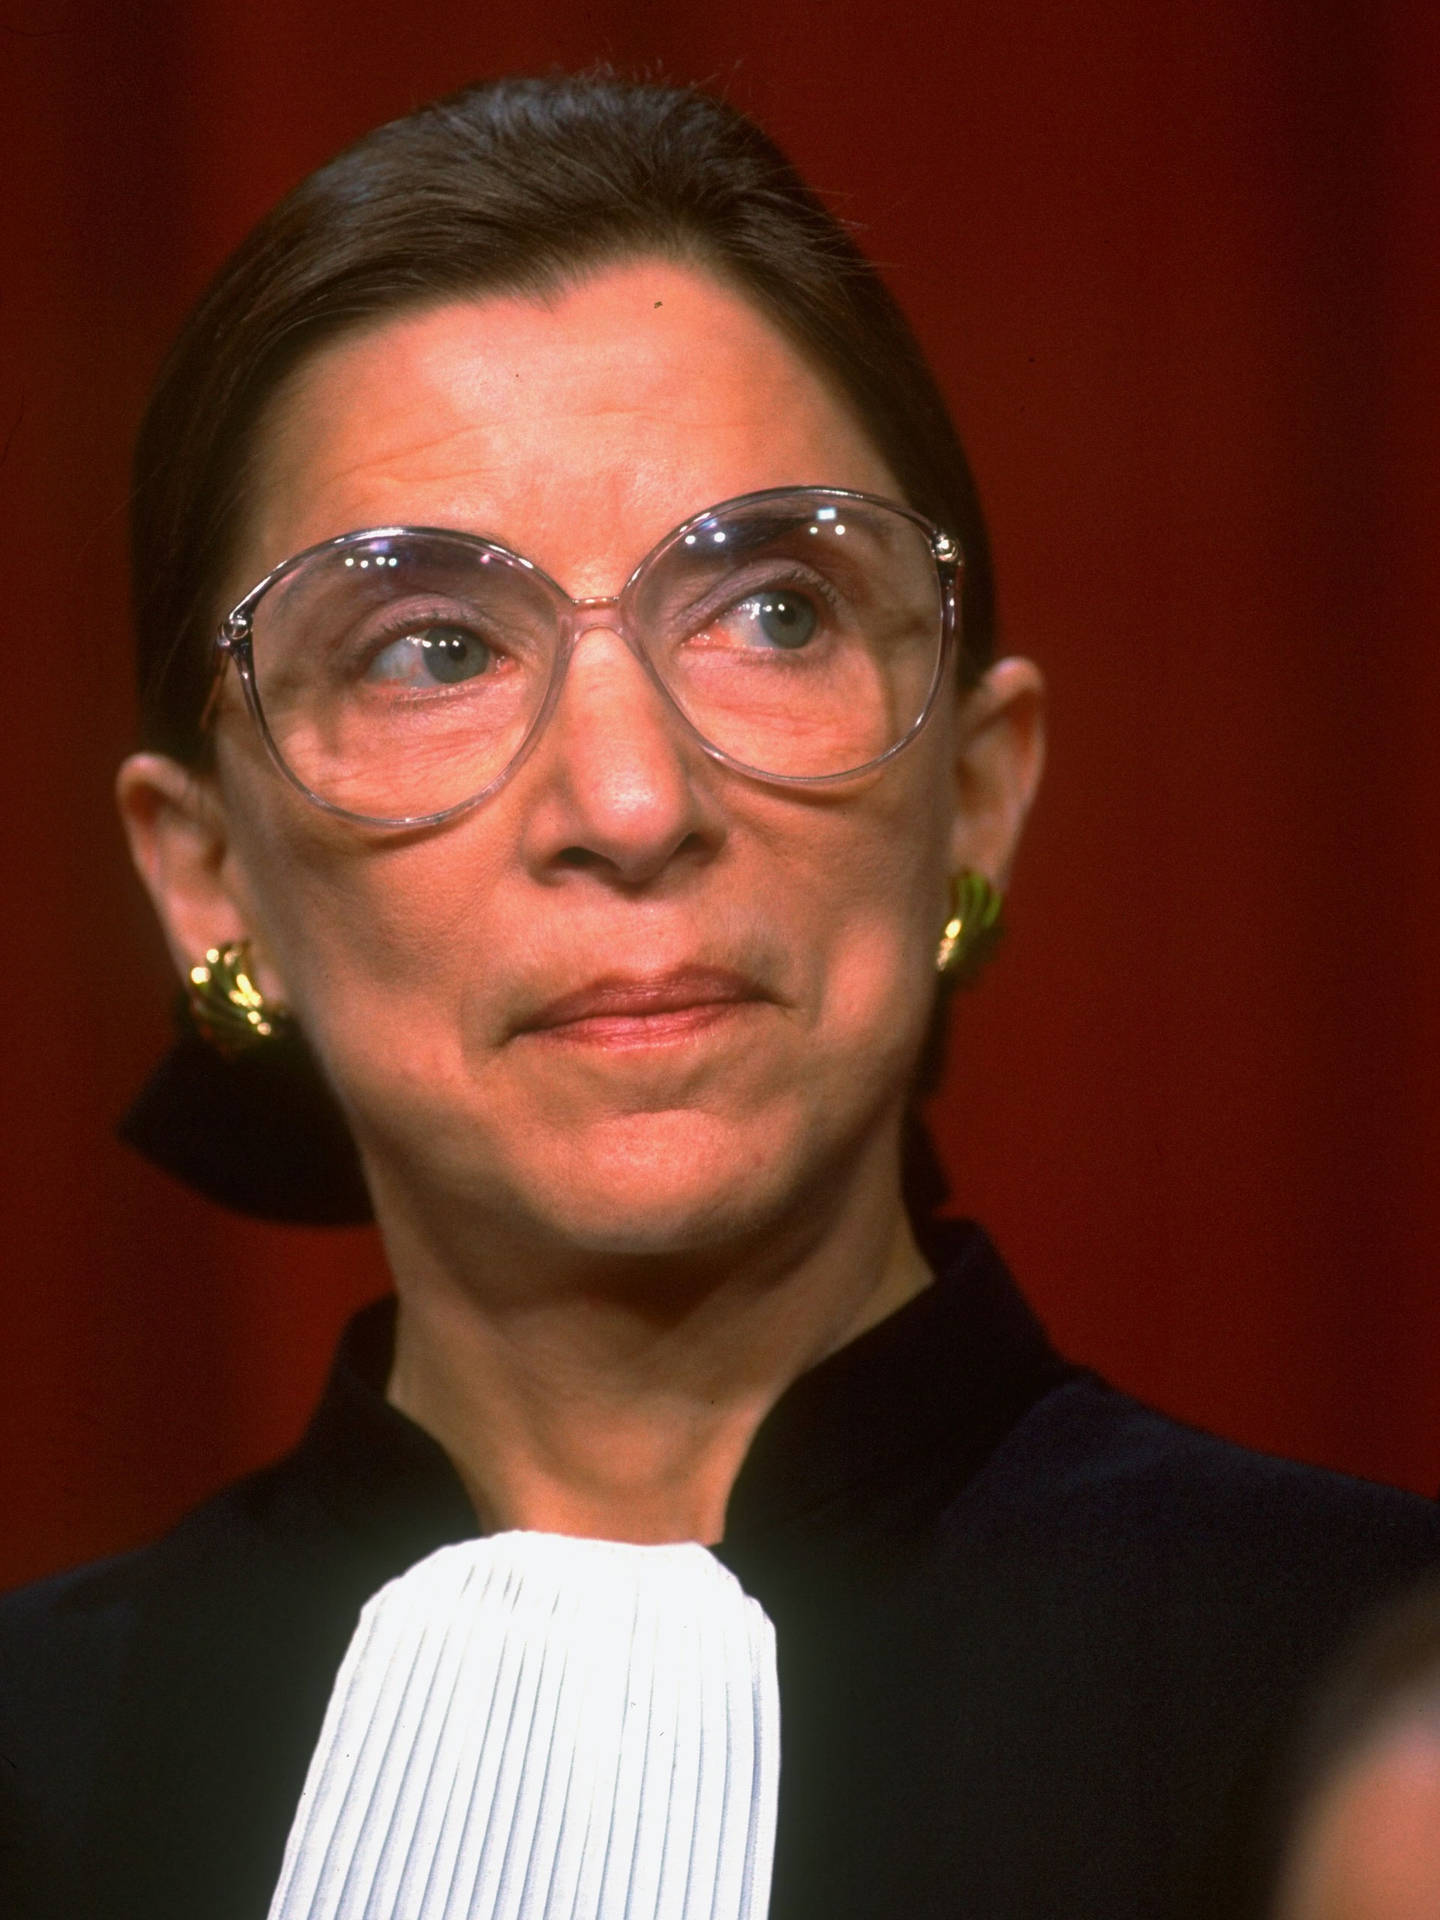 Caption: Ruth Bader Ginsburg - Champion Of Equality And Justice